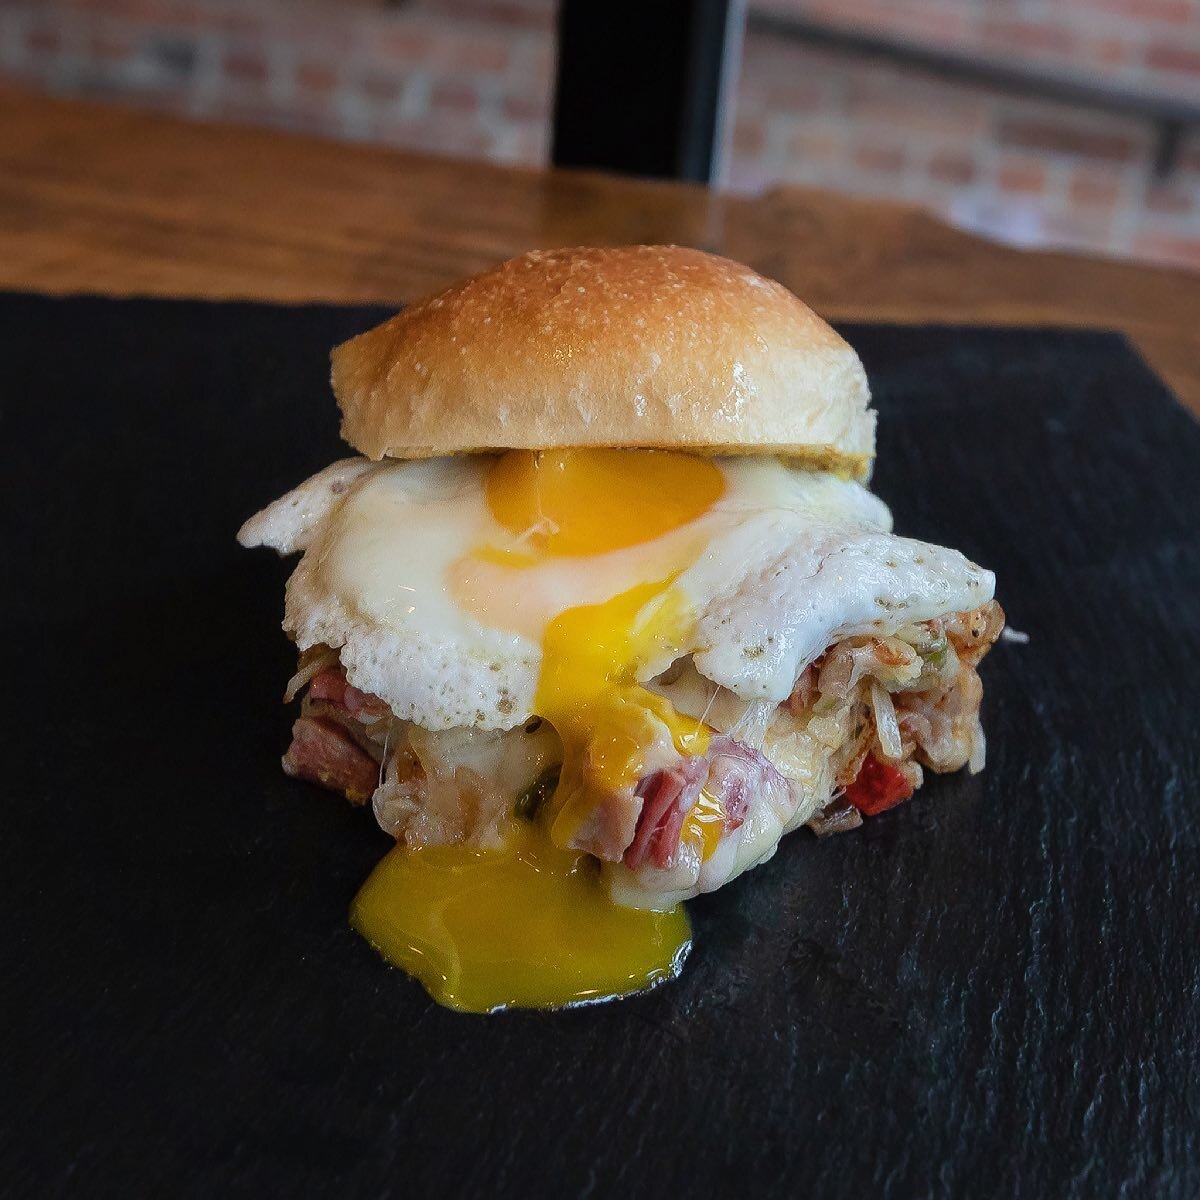 Get your Corned Beef itch scratched right here! Corned beef hash, egg, Swiss, spicy brown mustard on a round roll! On special tomorrow all day! 8-4 Breakie or Lunch!
.
.
.
.
.
.

.
.
.
#hungry #eatingfortheinsta #foodgasm #foodporn #dailyfoodfeed #as